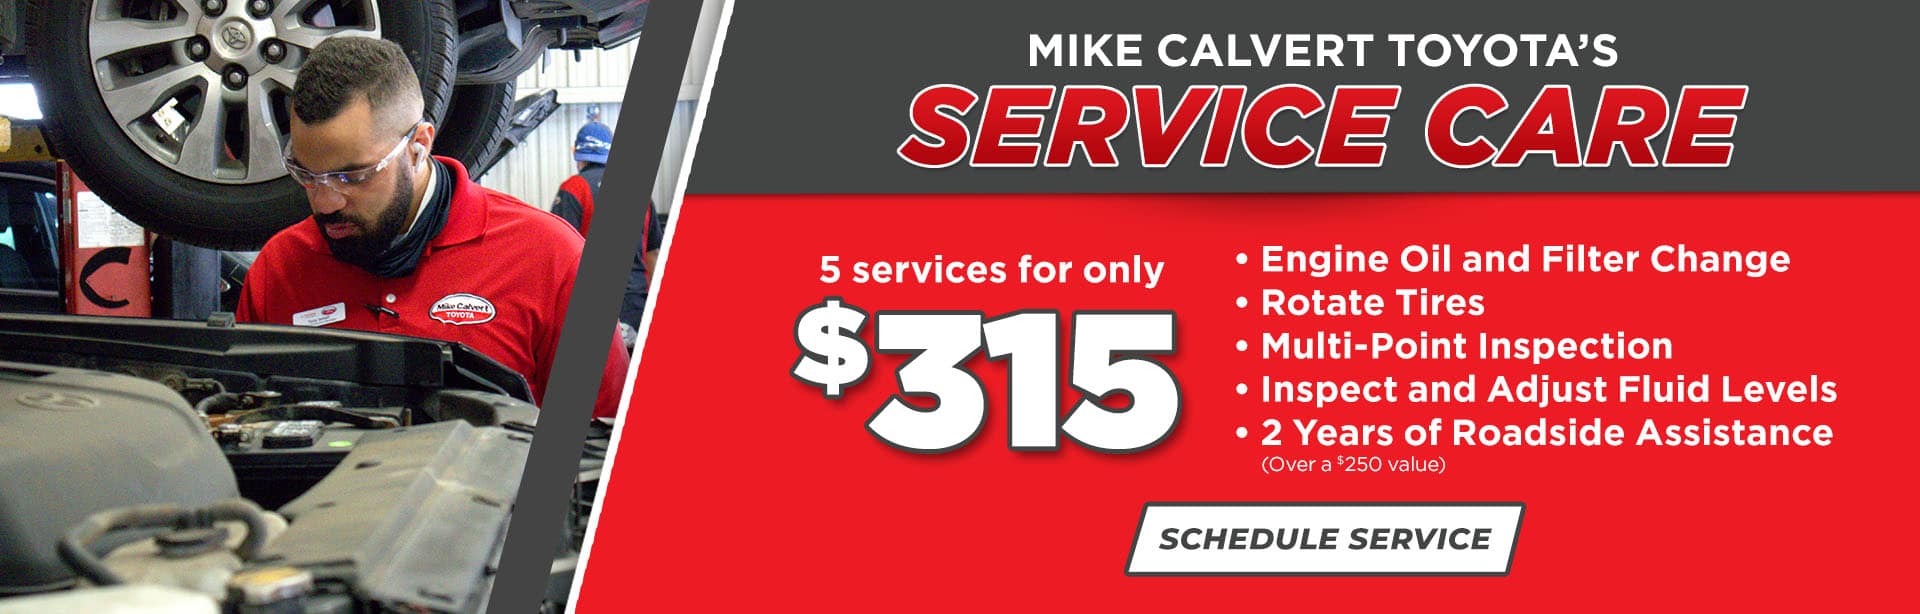 Schedule Your Service at Mike Calvert Toyota